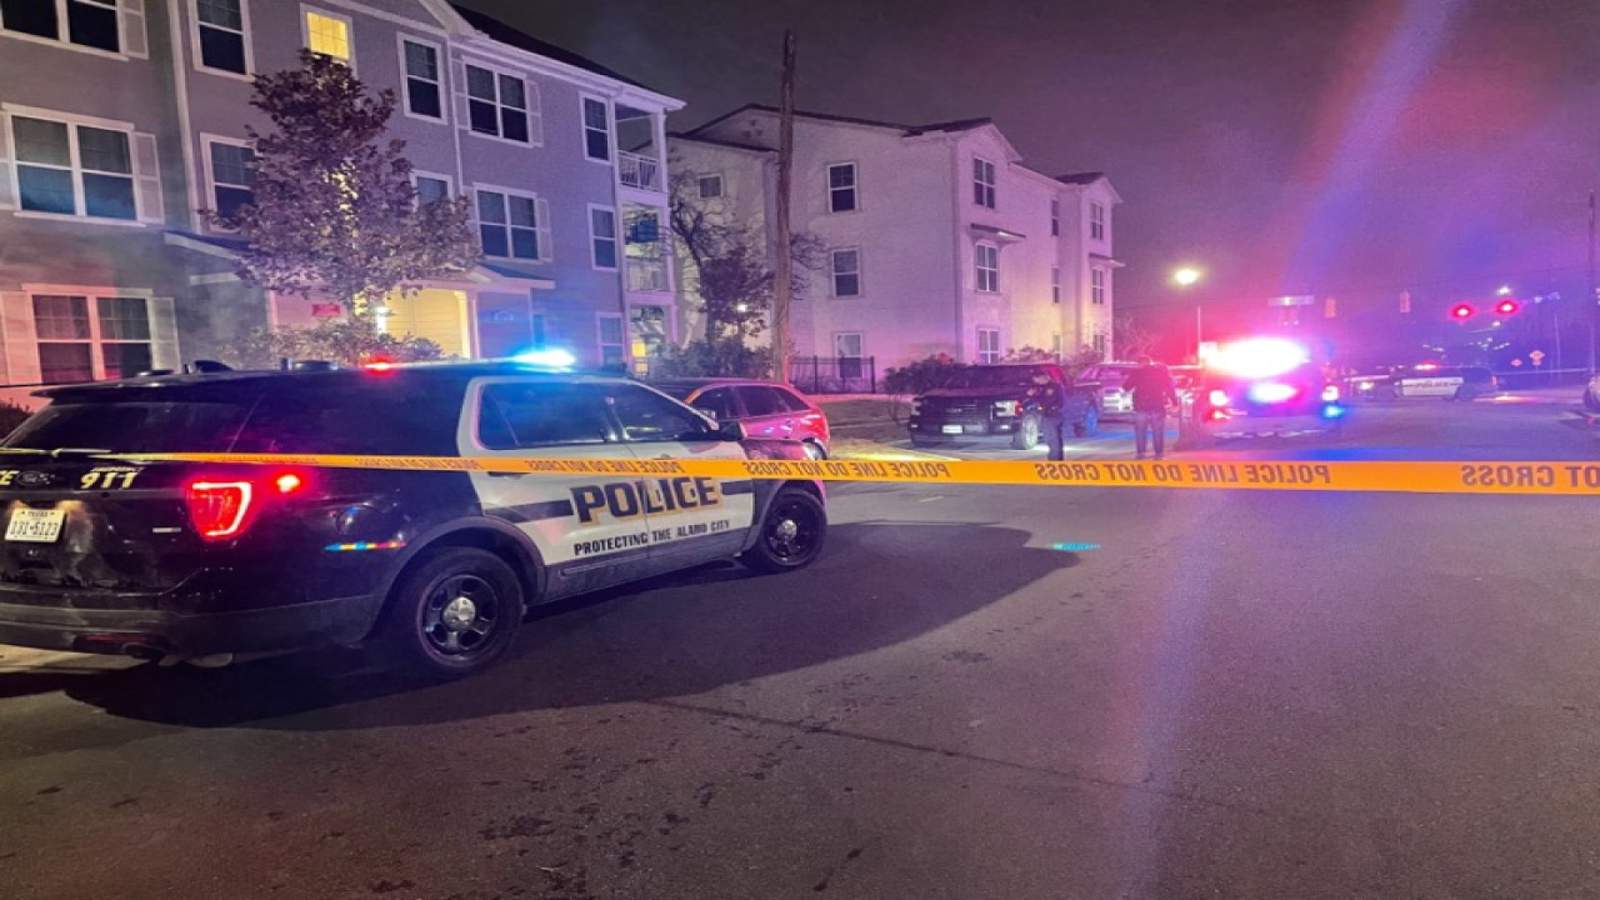 Man killed in police shooting after shooting at child’s mother’s friend in East Side apartment, chief says